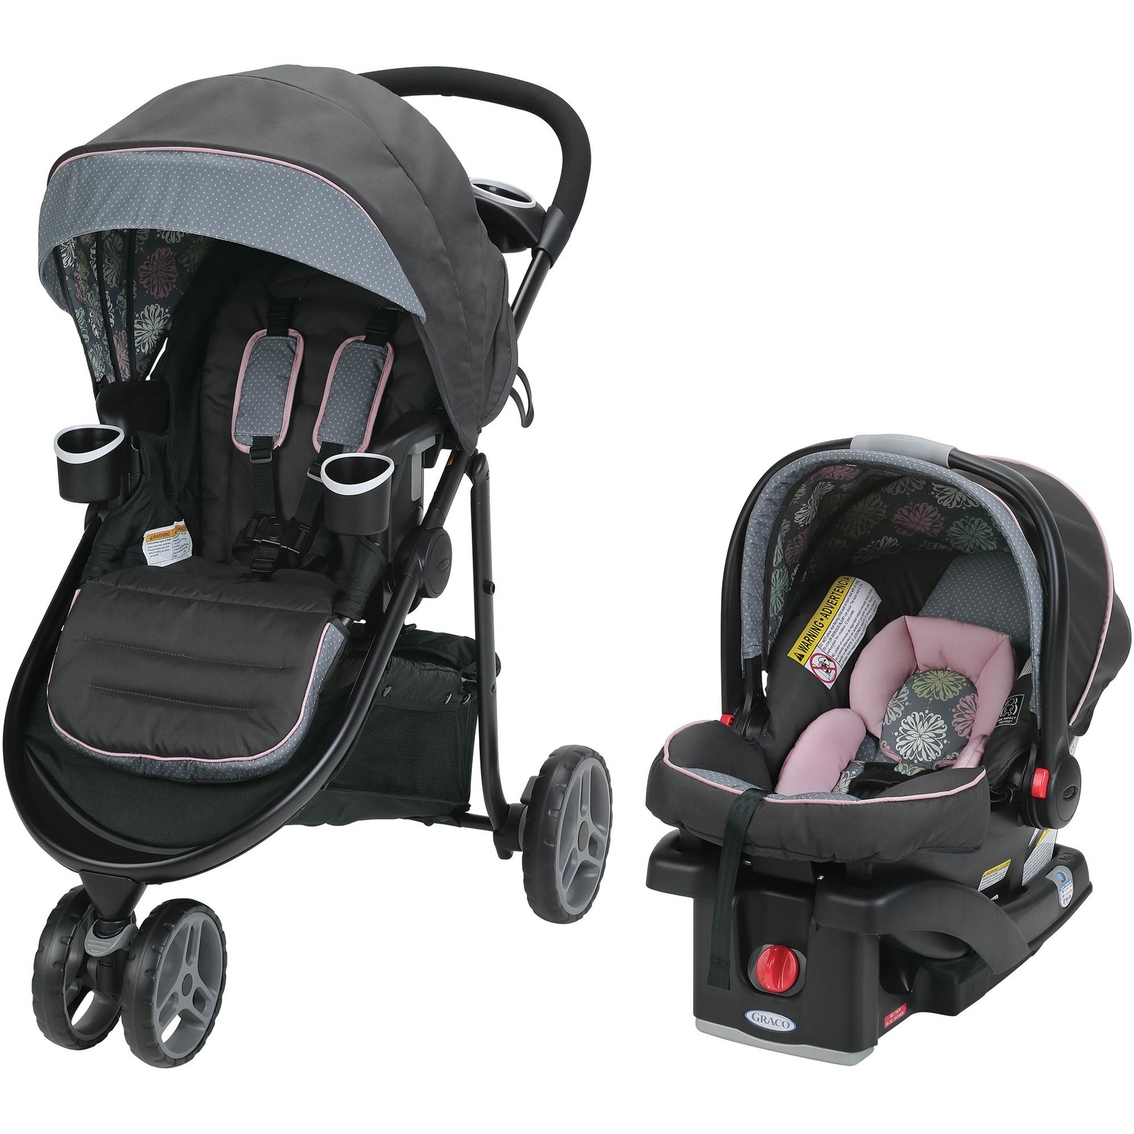 graco click connect infant car seat and stroller